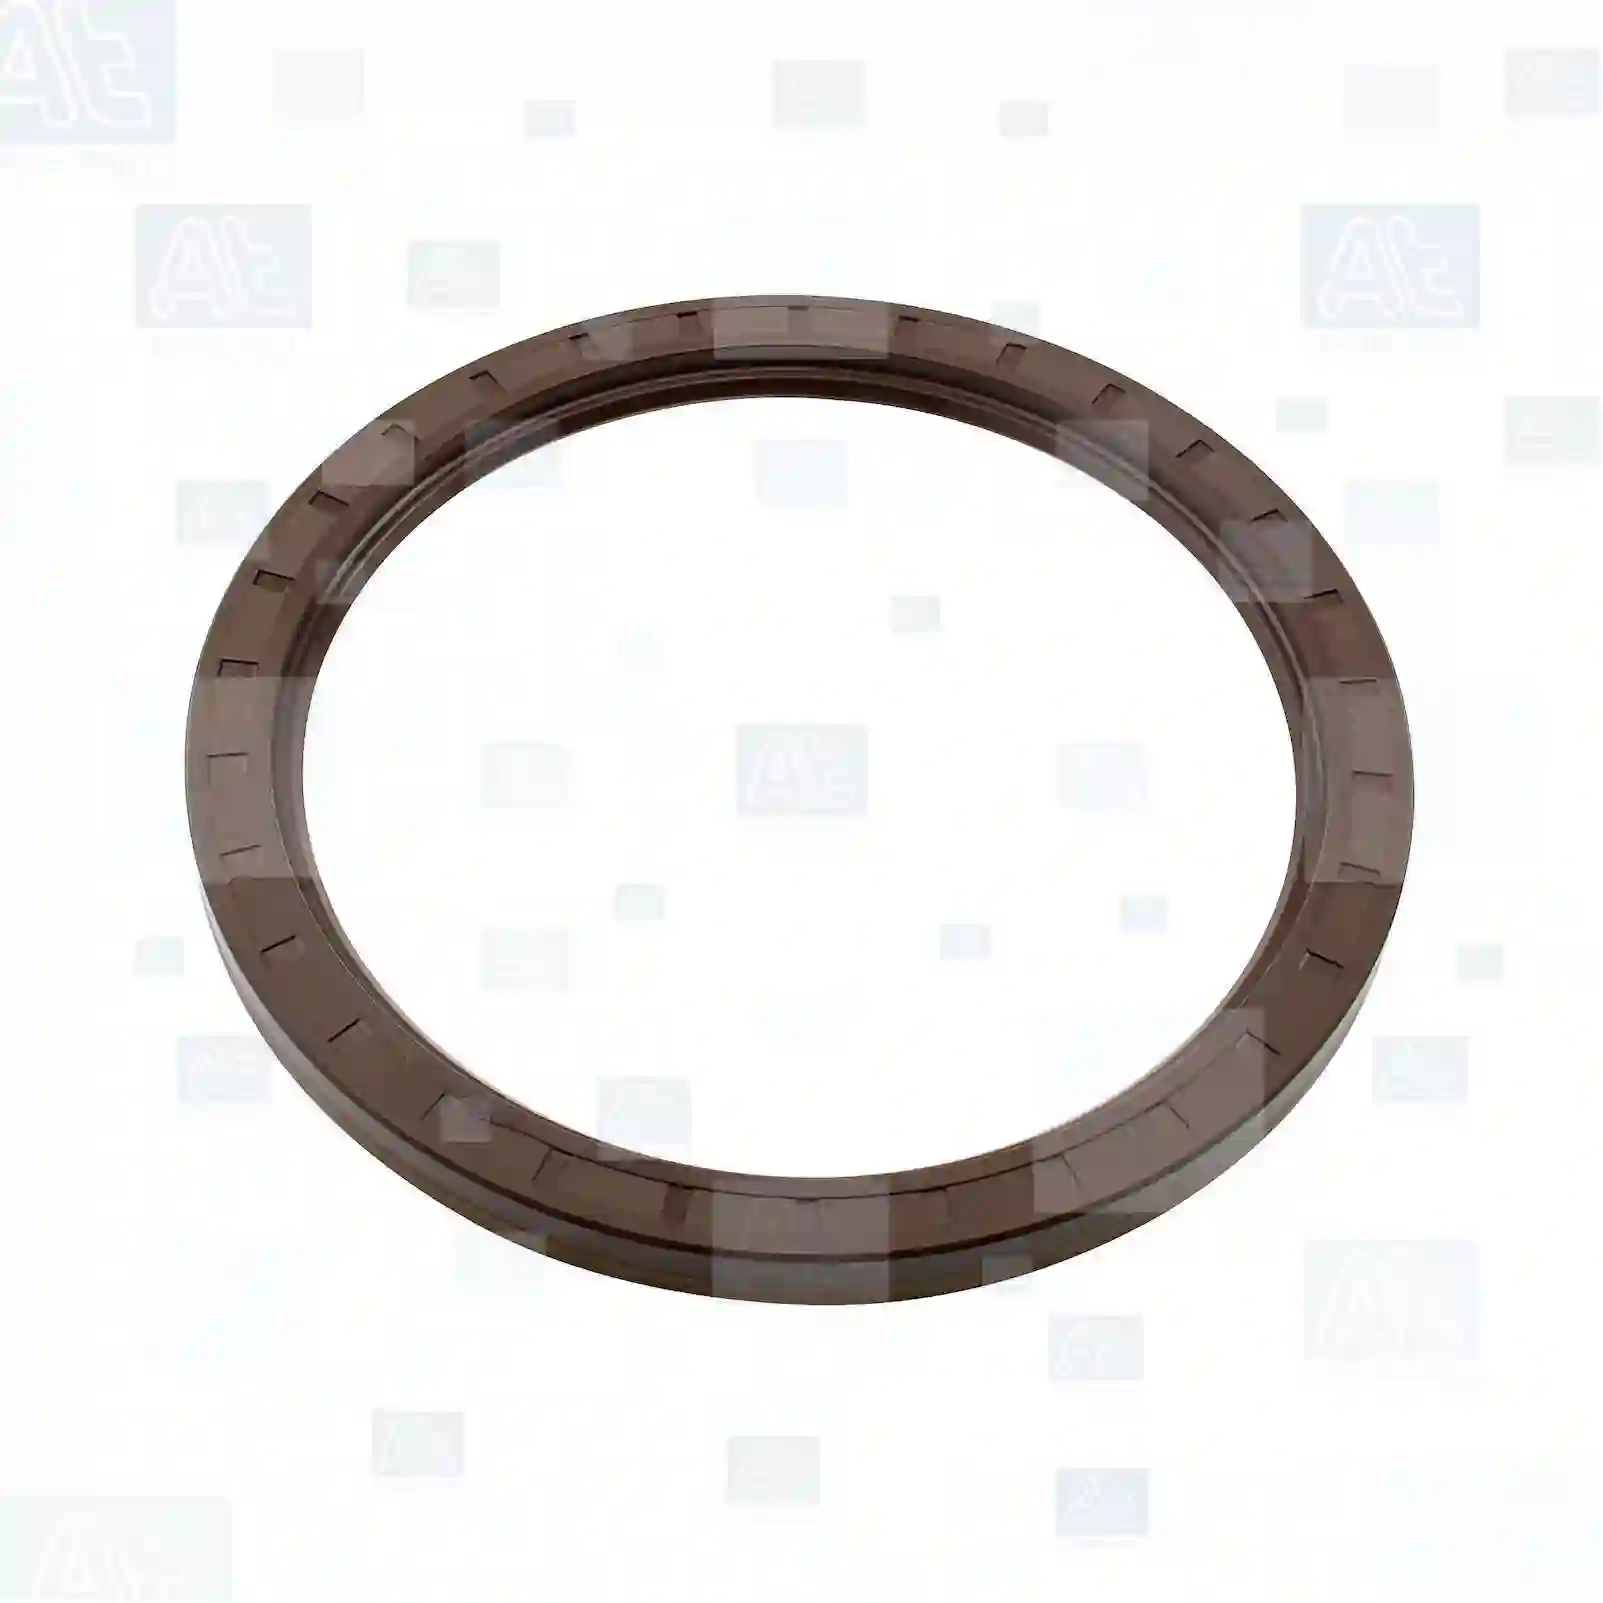 Oil seal, at no 77726129, oem no: 06562790033, 06562890053, 06562890055, 06562890063, 06562890065, 06562890066, 06562890145, 06562890247, 06562890330, 06562890331, 06562890333, 06562890334, 81965010860, 81965010862, 81965030153, 81965030154, 0119970146, 0119971246, 0119973146, 0119973846, 0119974346, 0119975247, 0139970447, 0139975947, 0139976547, 0139979347, 0139979447, ZG02680-0008 At Spare Part | Engine, Accelerator Pedal, Camshaft, Connecting Rod, Crankcase, Crankshaft, Cylinder Head, Engine Suspension Mountings, Exhaust Manifold, Exhaust Gas Recirculation, Filter Kits, Flywheel Housing, General Overhaul Kits, Engine, Intake Manifold, Oil Cleaner, Oil Cooler, Oil Filter, Oil Pump, Oil Sump, Piston & Liner, Sensor & Switch, Timing Case, Turbocharger, Cooling System, Belt Tensioner, Coolant Filter, Coolant Pipe, Corrosion Prevention Agent, Drive, Expansion Tank, Fan, Intercooler, Monitors & Gauges, Radiator, Thermostat, V-Belt / Timing belt, Water Pump, Fuel System, Electronical Injector Unit, Feed Pump, Fuel Filter, cpl., Fuel Gauge Sender,  Fuel Line, Fuel Pump, Fuel Tank, Injection Line Kit, Injection Pump, Exhaust System, Clutch & Pedal, Gearbox, Propeller Shaft, Axles, Brake System, Hubs & Wheels, Suspension, Leaf Spring, Universal Parts / Accessories, Steering, Electrical System, Cabin Oil seal, at no 77726129, oem no: 06562790033, 06562890053, 06562890055, 06562890063, 06562890065, 06562890066, 06562890145, 06562890247, 06562890330, 06562890331, 06562890333, 06562890334, 81965010860, 81965010862, 81965030153, 81965030154, 0119970146, 0119971246, 0119973146, 0119973846, 0119974346, 0119975247, 0139970447, 0139975947, 0139976547, 0139979347, 0139979447, ZG02680-0008 At Spare Part | Engine, Accelerator Pedal, Camshaft, Connecting Rod, Crankcase, Crankshaft, Cylinder Head, Engine Suspension Mountings, Exhaust Manifold, Exhaust Gas Recirculation, Filter Kits, Flywheel Housing, General Overhaul Kits, Engine, Intake Manifold, Oil Cleaner, Oil Cooler, Oil Filter, Oil Pump, Oil Sump, Piston & Liner, Sensor & Switch, Timing Case, Turbocharger, Cooling System, Belt Tensioner, Coolant Filter, Coolant Pipe, Corrosion Prevention Agent, Drive, Expansion Tank, Fan, Intercooler, Monitors & Gauges, Radiator, Thermostat, V-Belt / Timing belt, Water Pump, Fuel System, Electronical Injector Unit, Feed Pump, Fuel Filter, cpl., Fuel Gauge Sender,  Fuel Line, Fuel Pump, Fuel Tank, Injection Line Kit, Injection Pump, Exhaust System, Clutch & Pedal, Gearbox, Propeller Shaft, Axles, Brake System, Hubs & Wheels, Suspension, Leaf Spring, Universal Parts / Accessories, Steering, Electrical System, Cabin